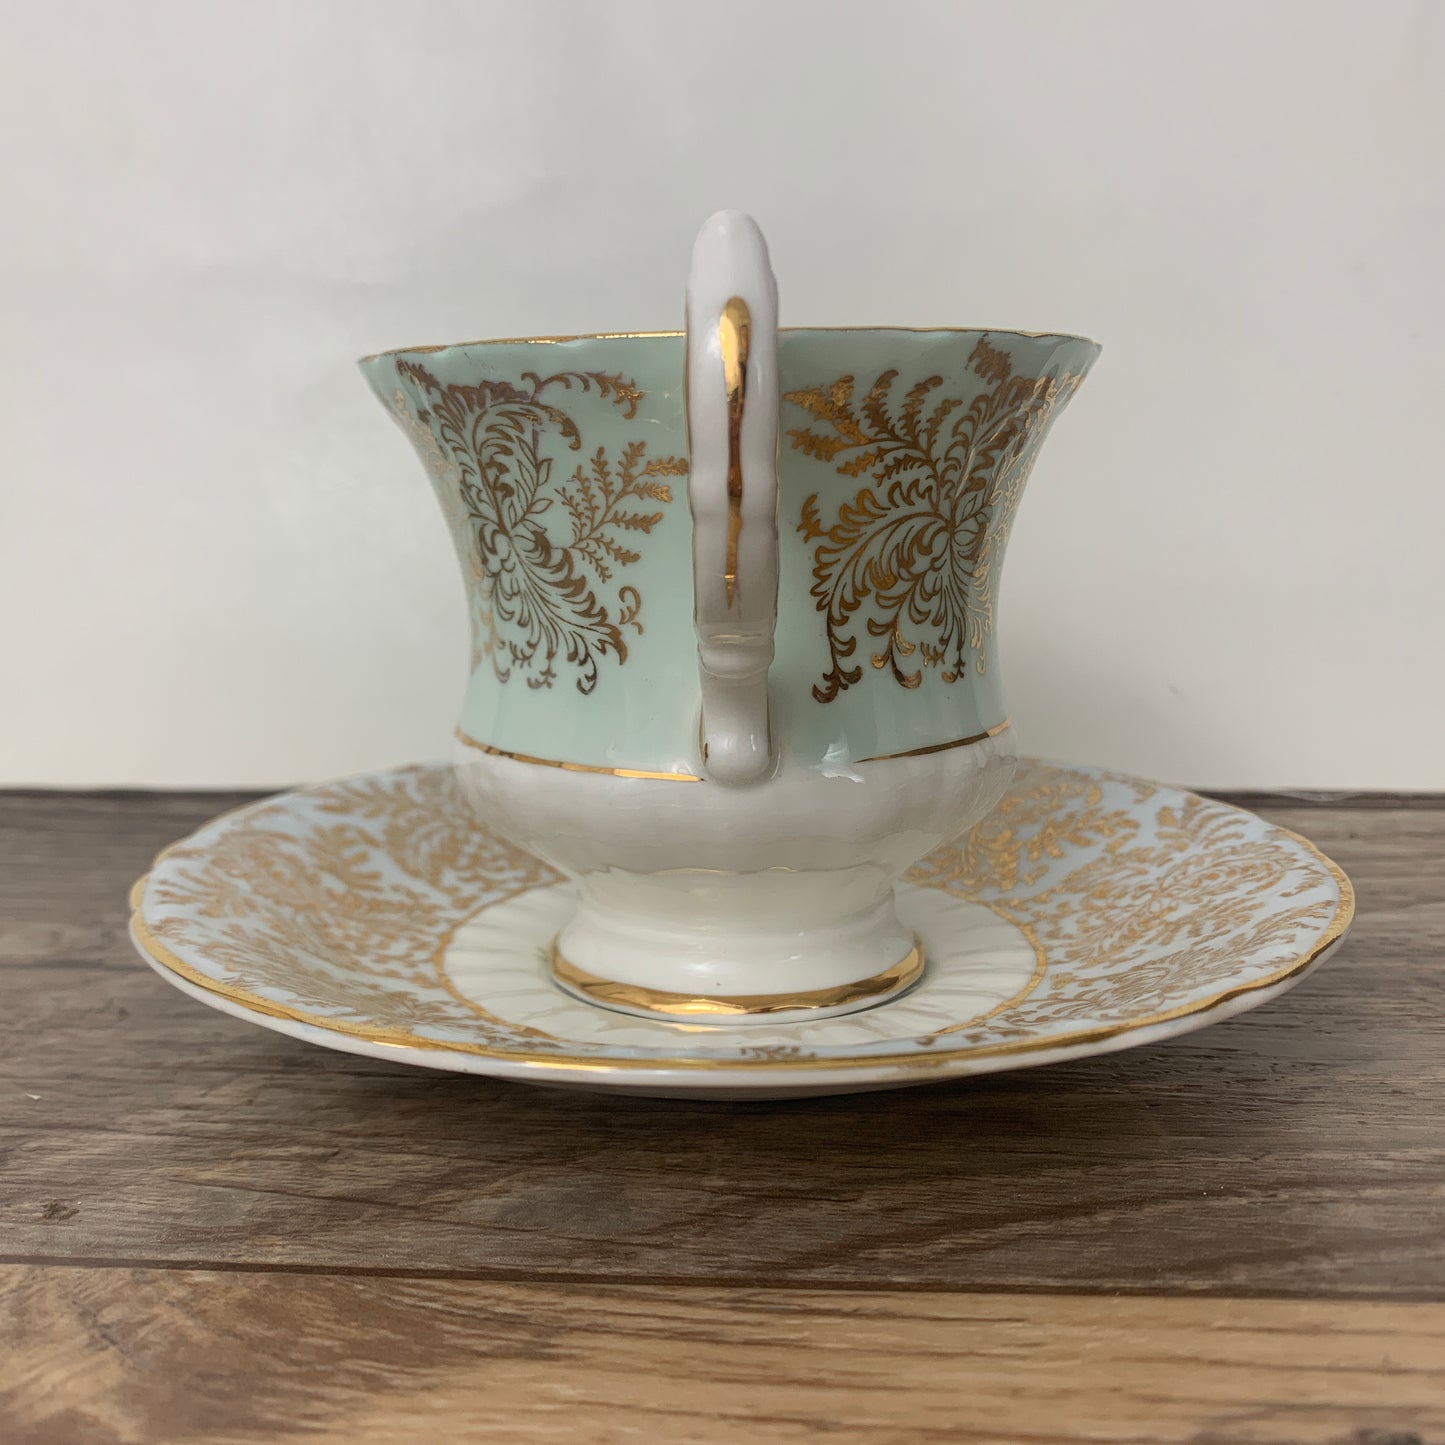 Paragon Pale Blue and Gold Vintage Teacup and Saucer